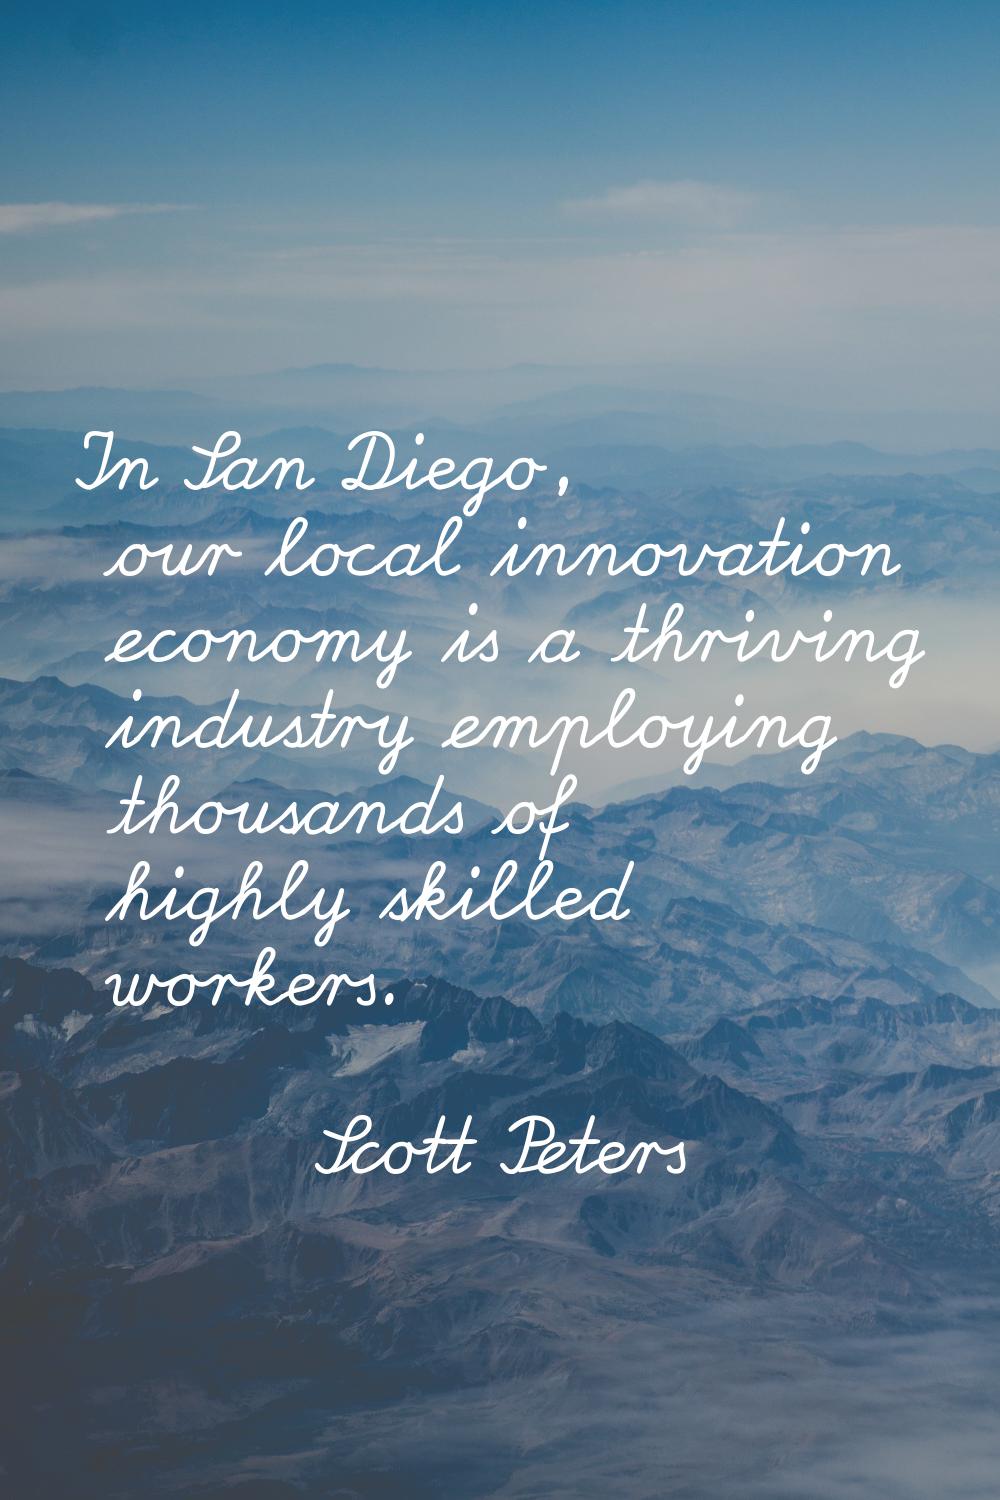 In San Diego, our local innovation economy is a thriving industry employing thousands of highly ski